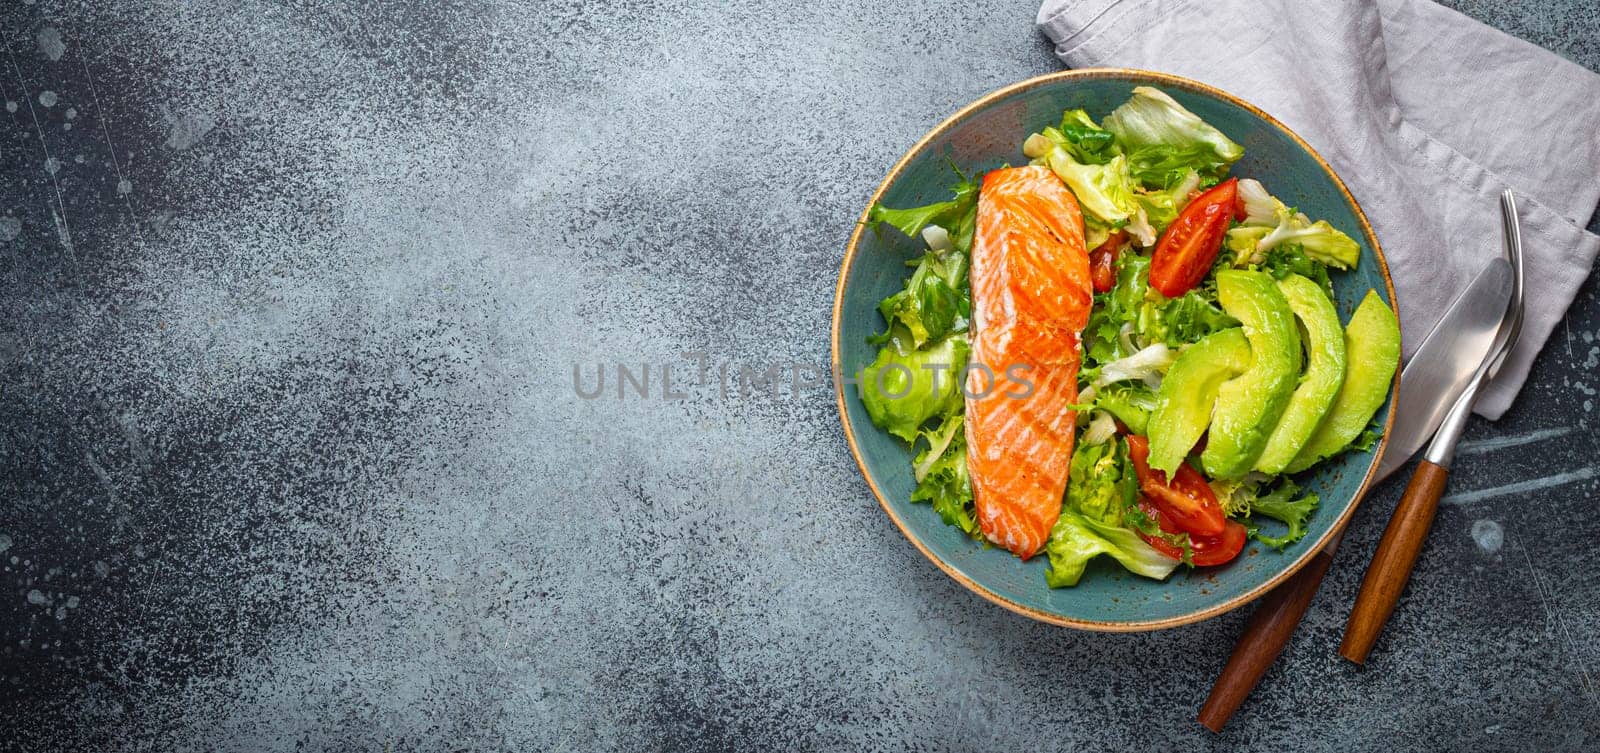 Grilled fish salmon steak and vegetables salad with avocado on ceramic plate on rustic stone background top view, balanced diet, healthy nutrition salad meal with salmon and veggies, space for text by its_al_dente